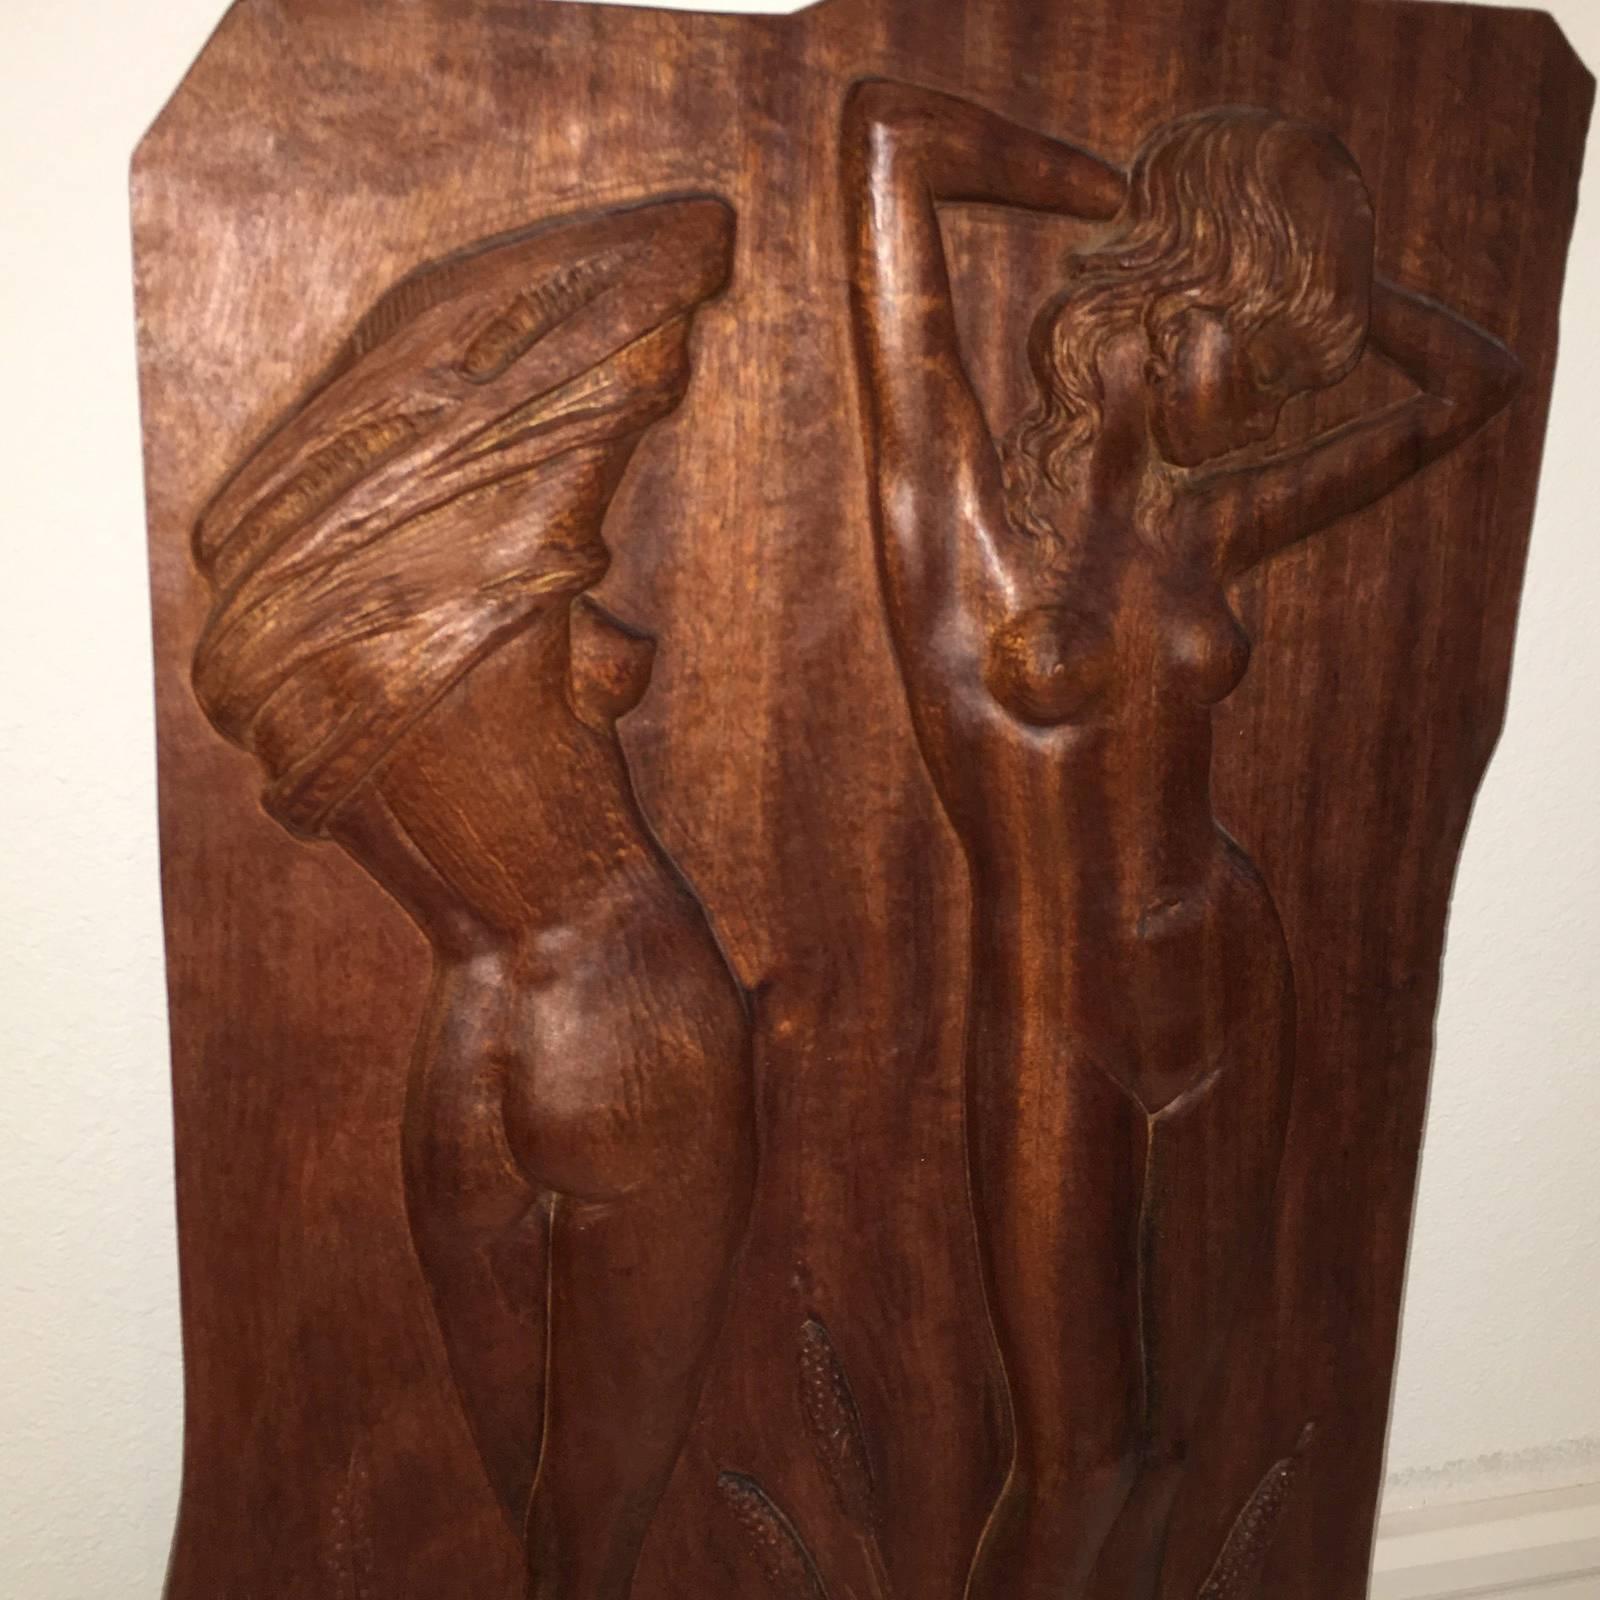 Beautiful wood carving by an unknown artist.
Hardwood (probably teakwood), live edge style.